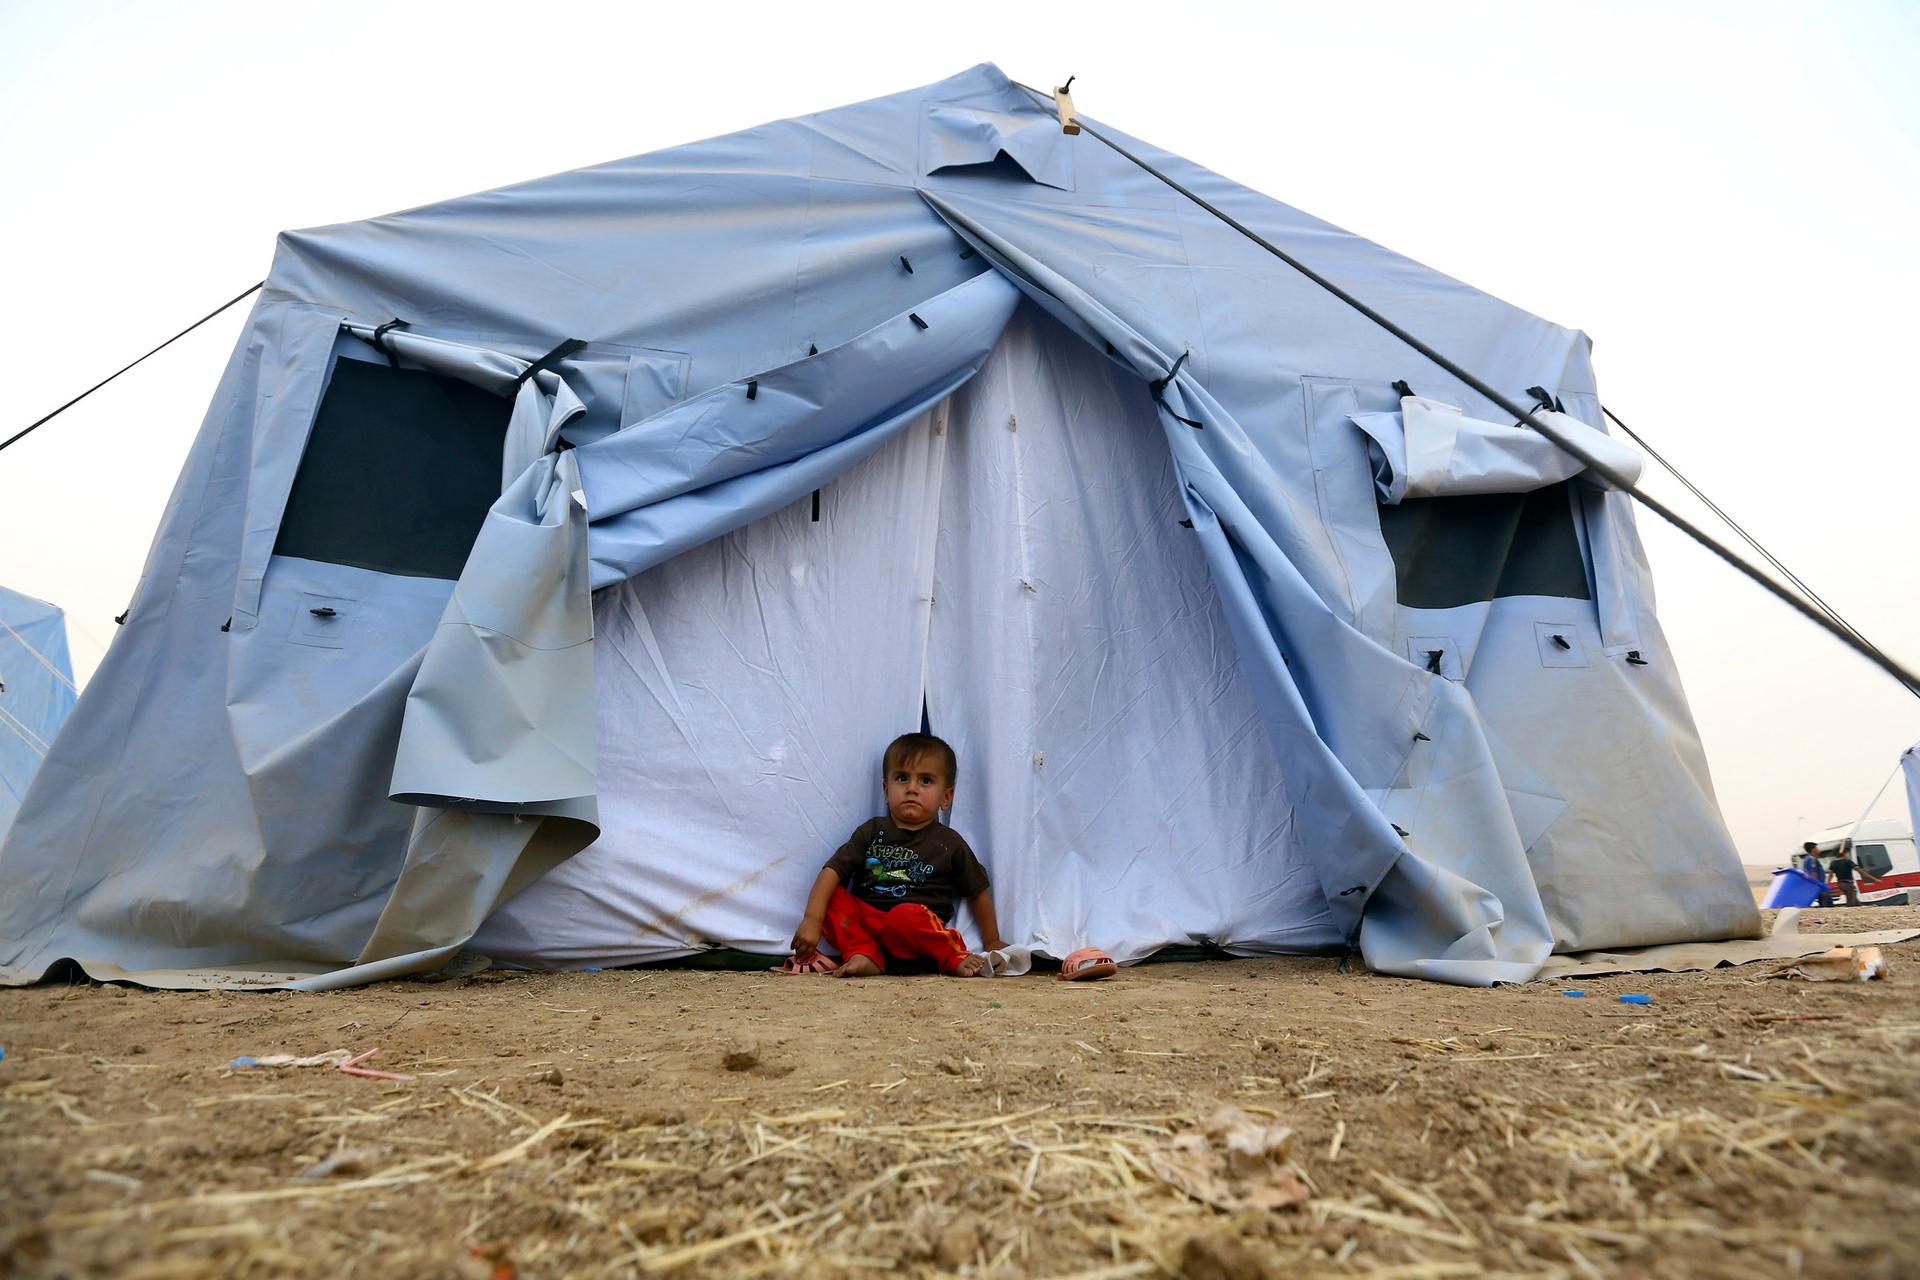 A boy who fled from the violence in Mosul sits outside a tent at a camp on the outskirts of Erbil in Iraq's Kurdistan region.